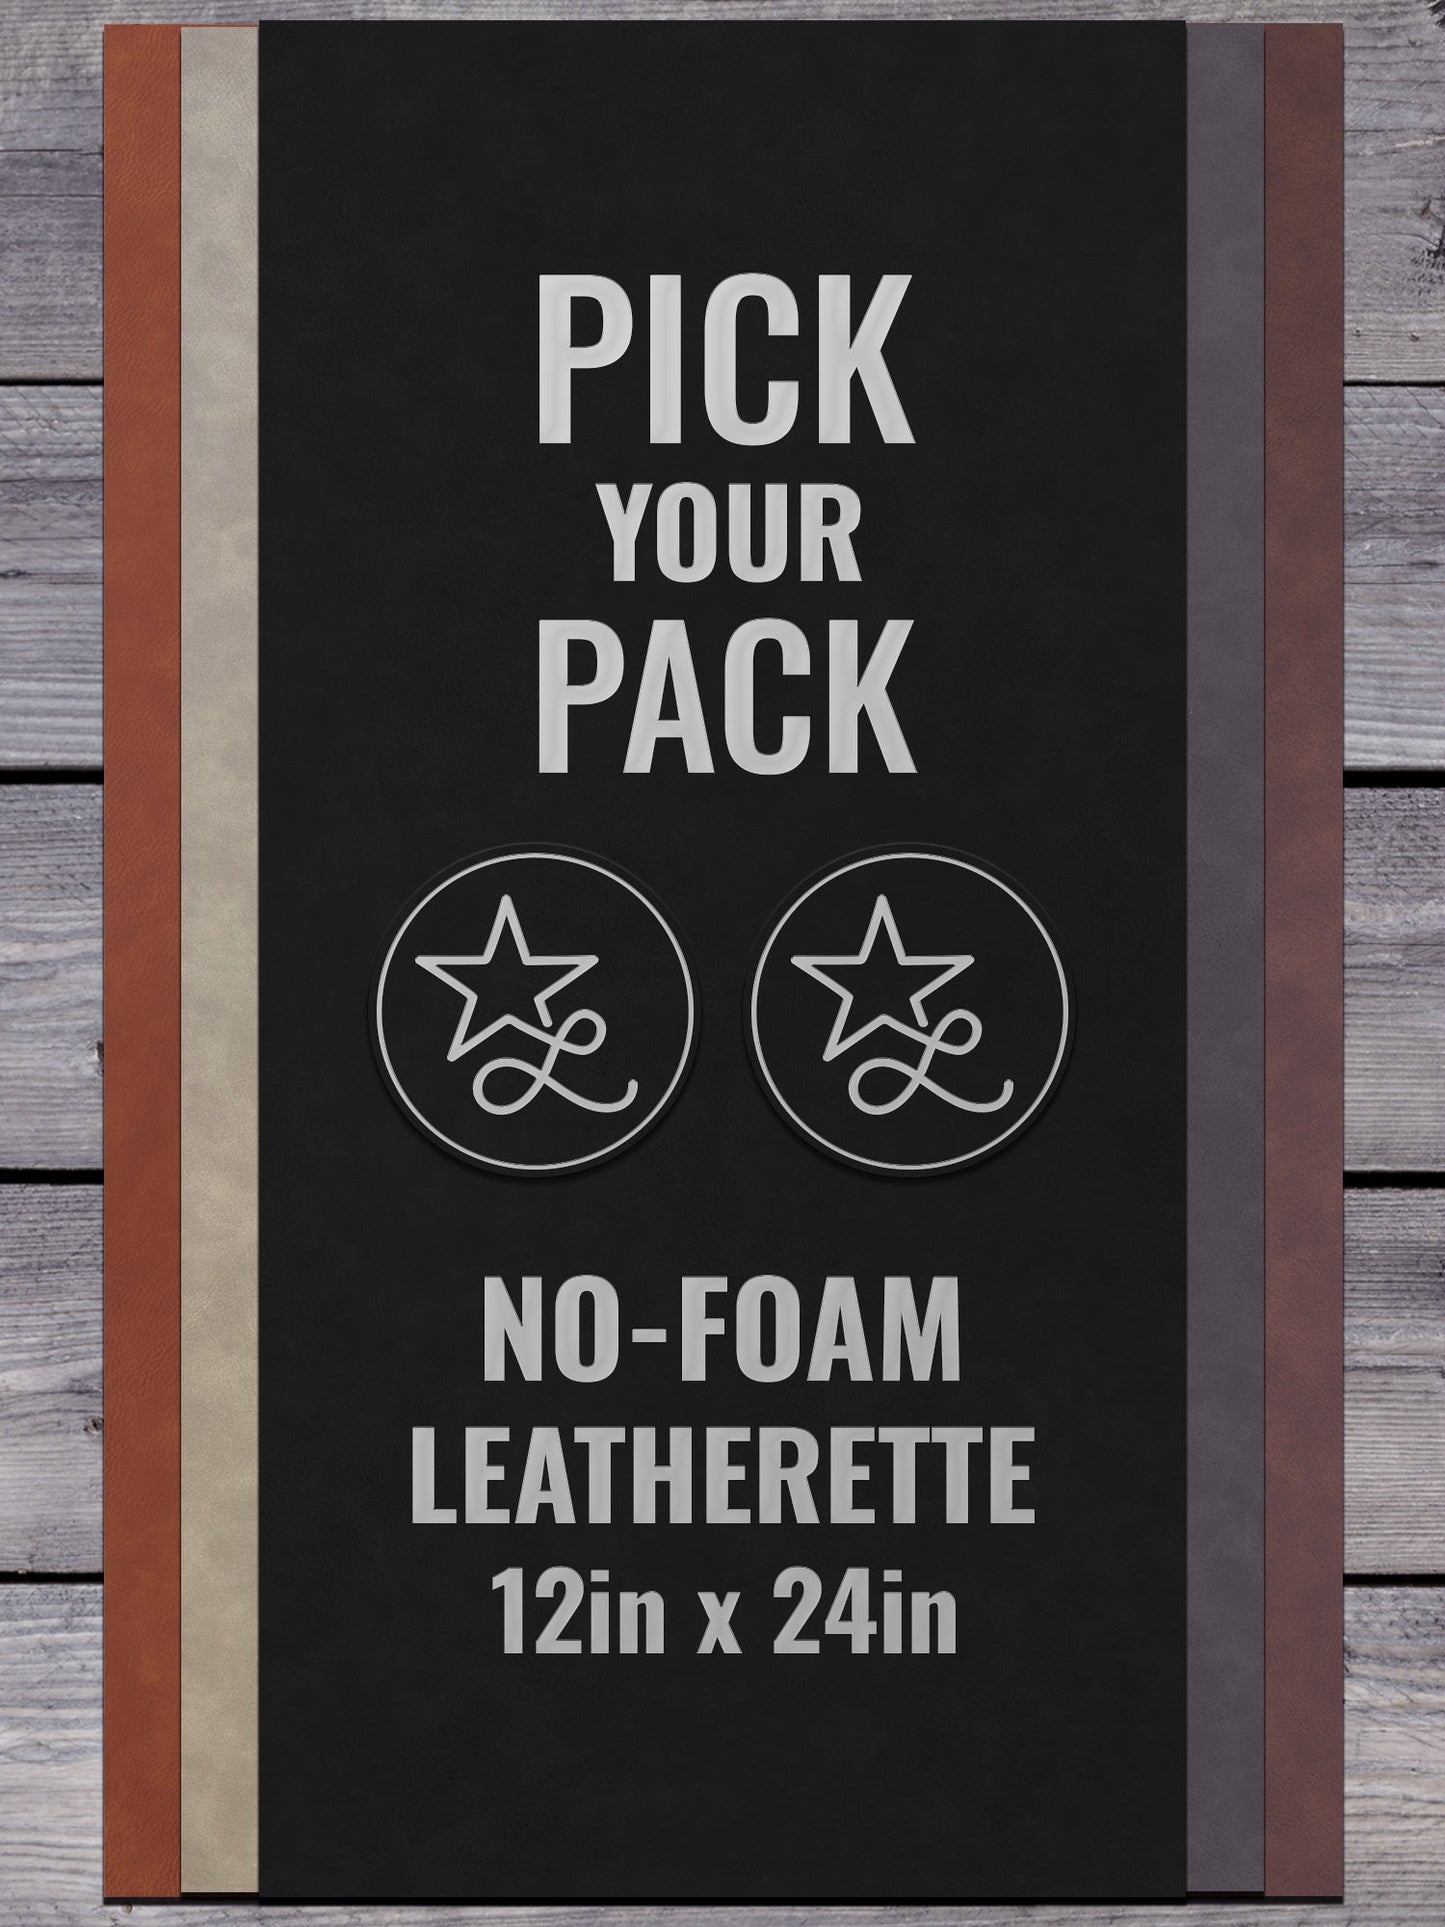 NO - FOAM "Pick Your Pack" Durra - Bull Leatherette Sheets (12x24) - #LoneStar Adhesive#